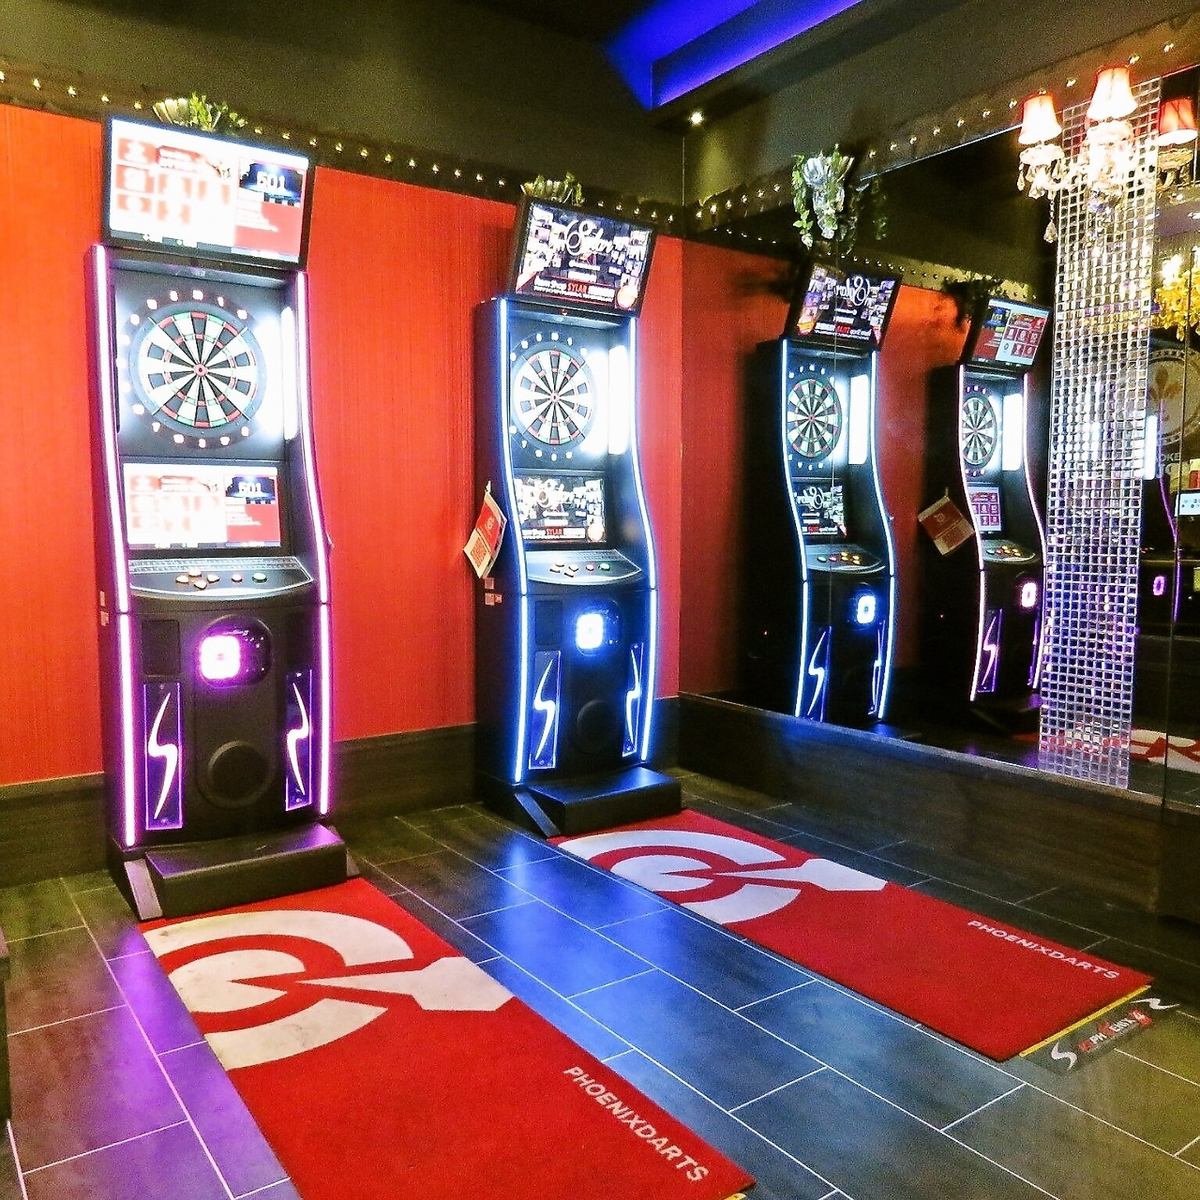 Darts are equipped with 2 units! Net game also possible ♪ Let's compete with rivals nationwide!